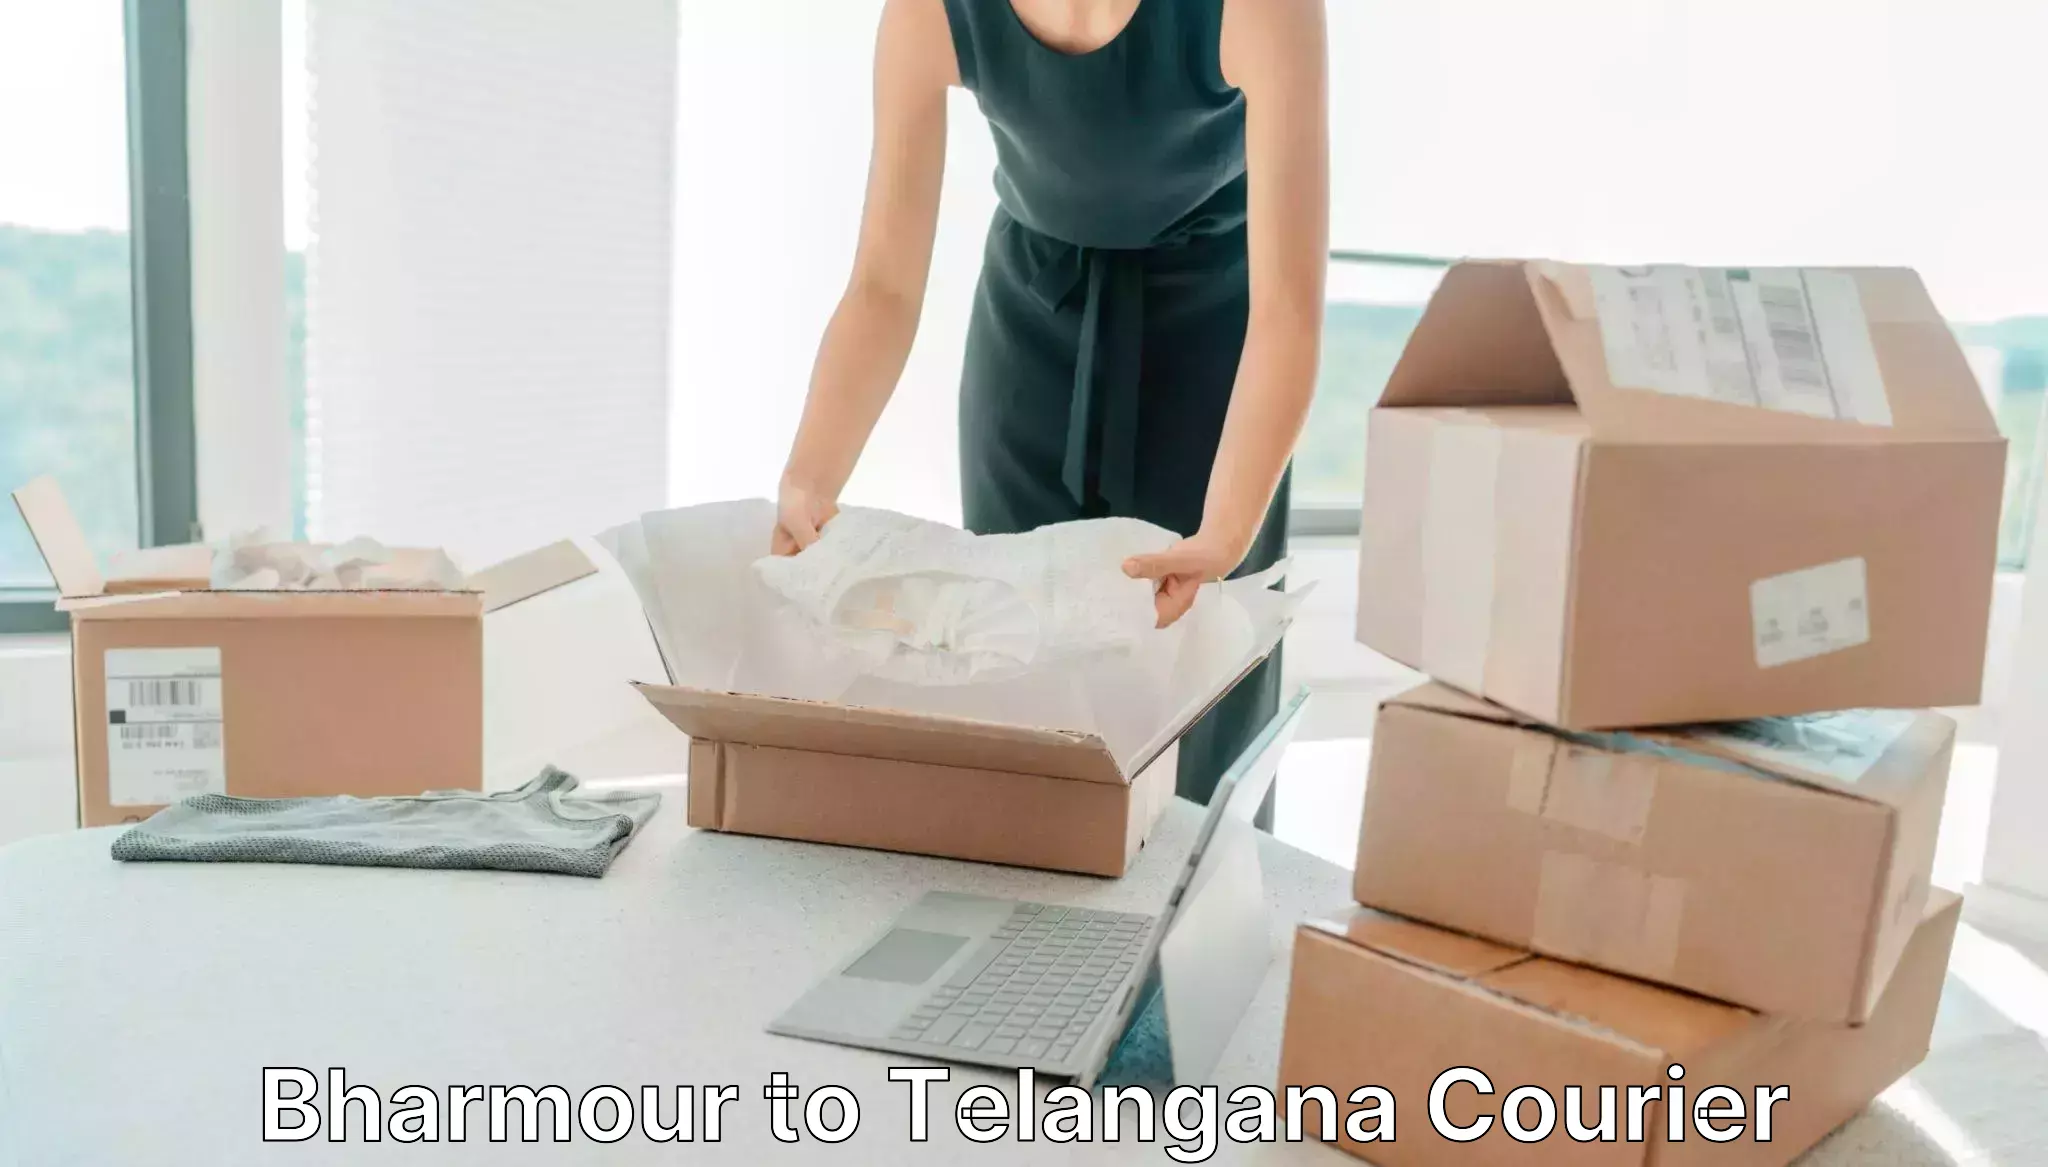 Next day courier in Bharmour to Dornakal